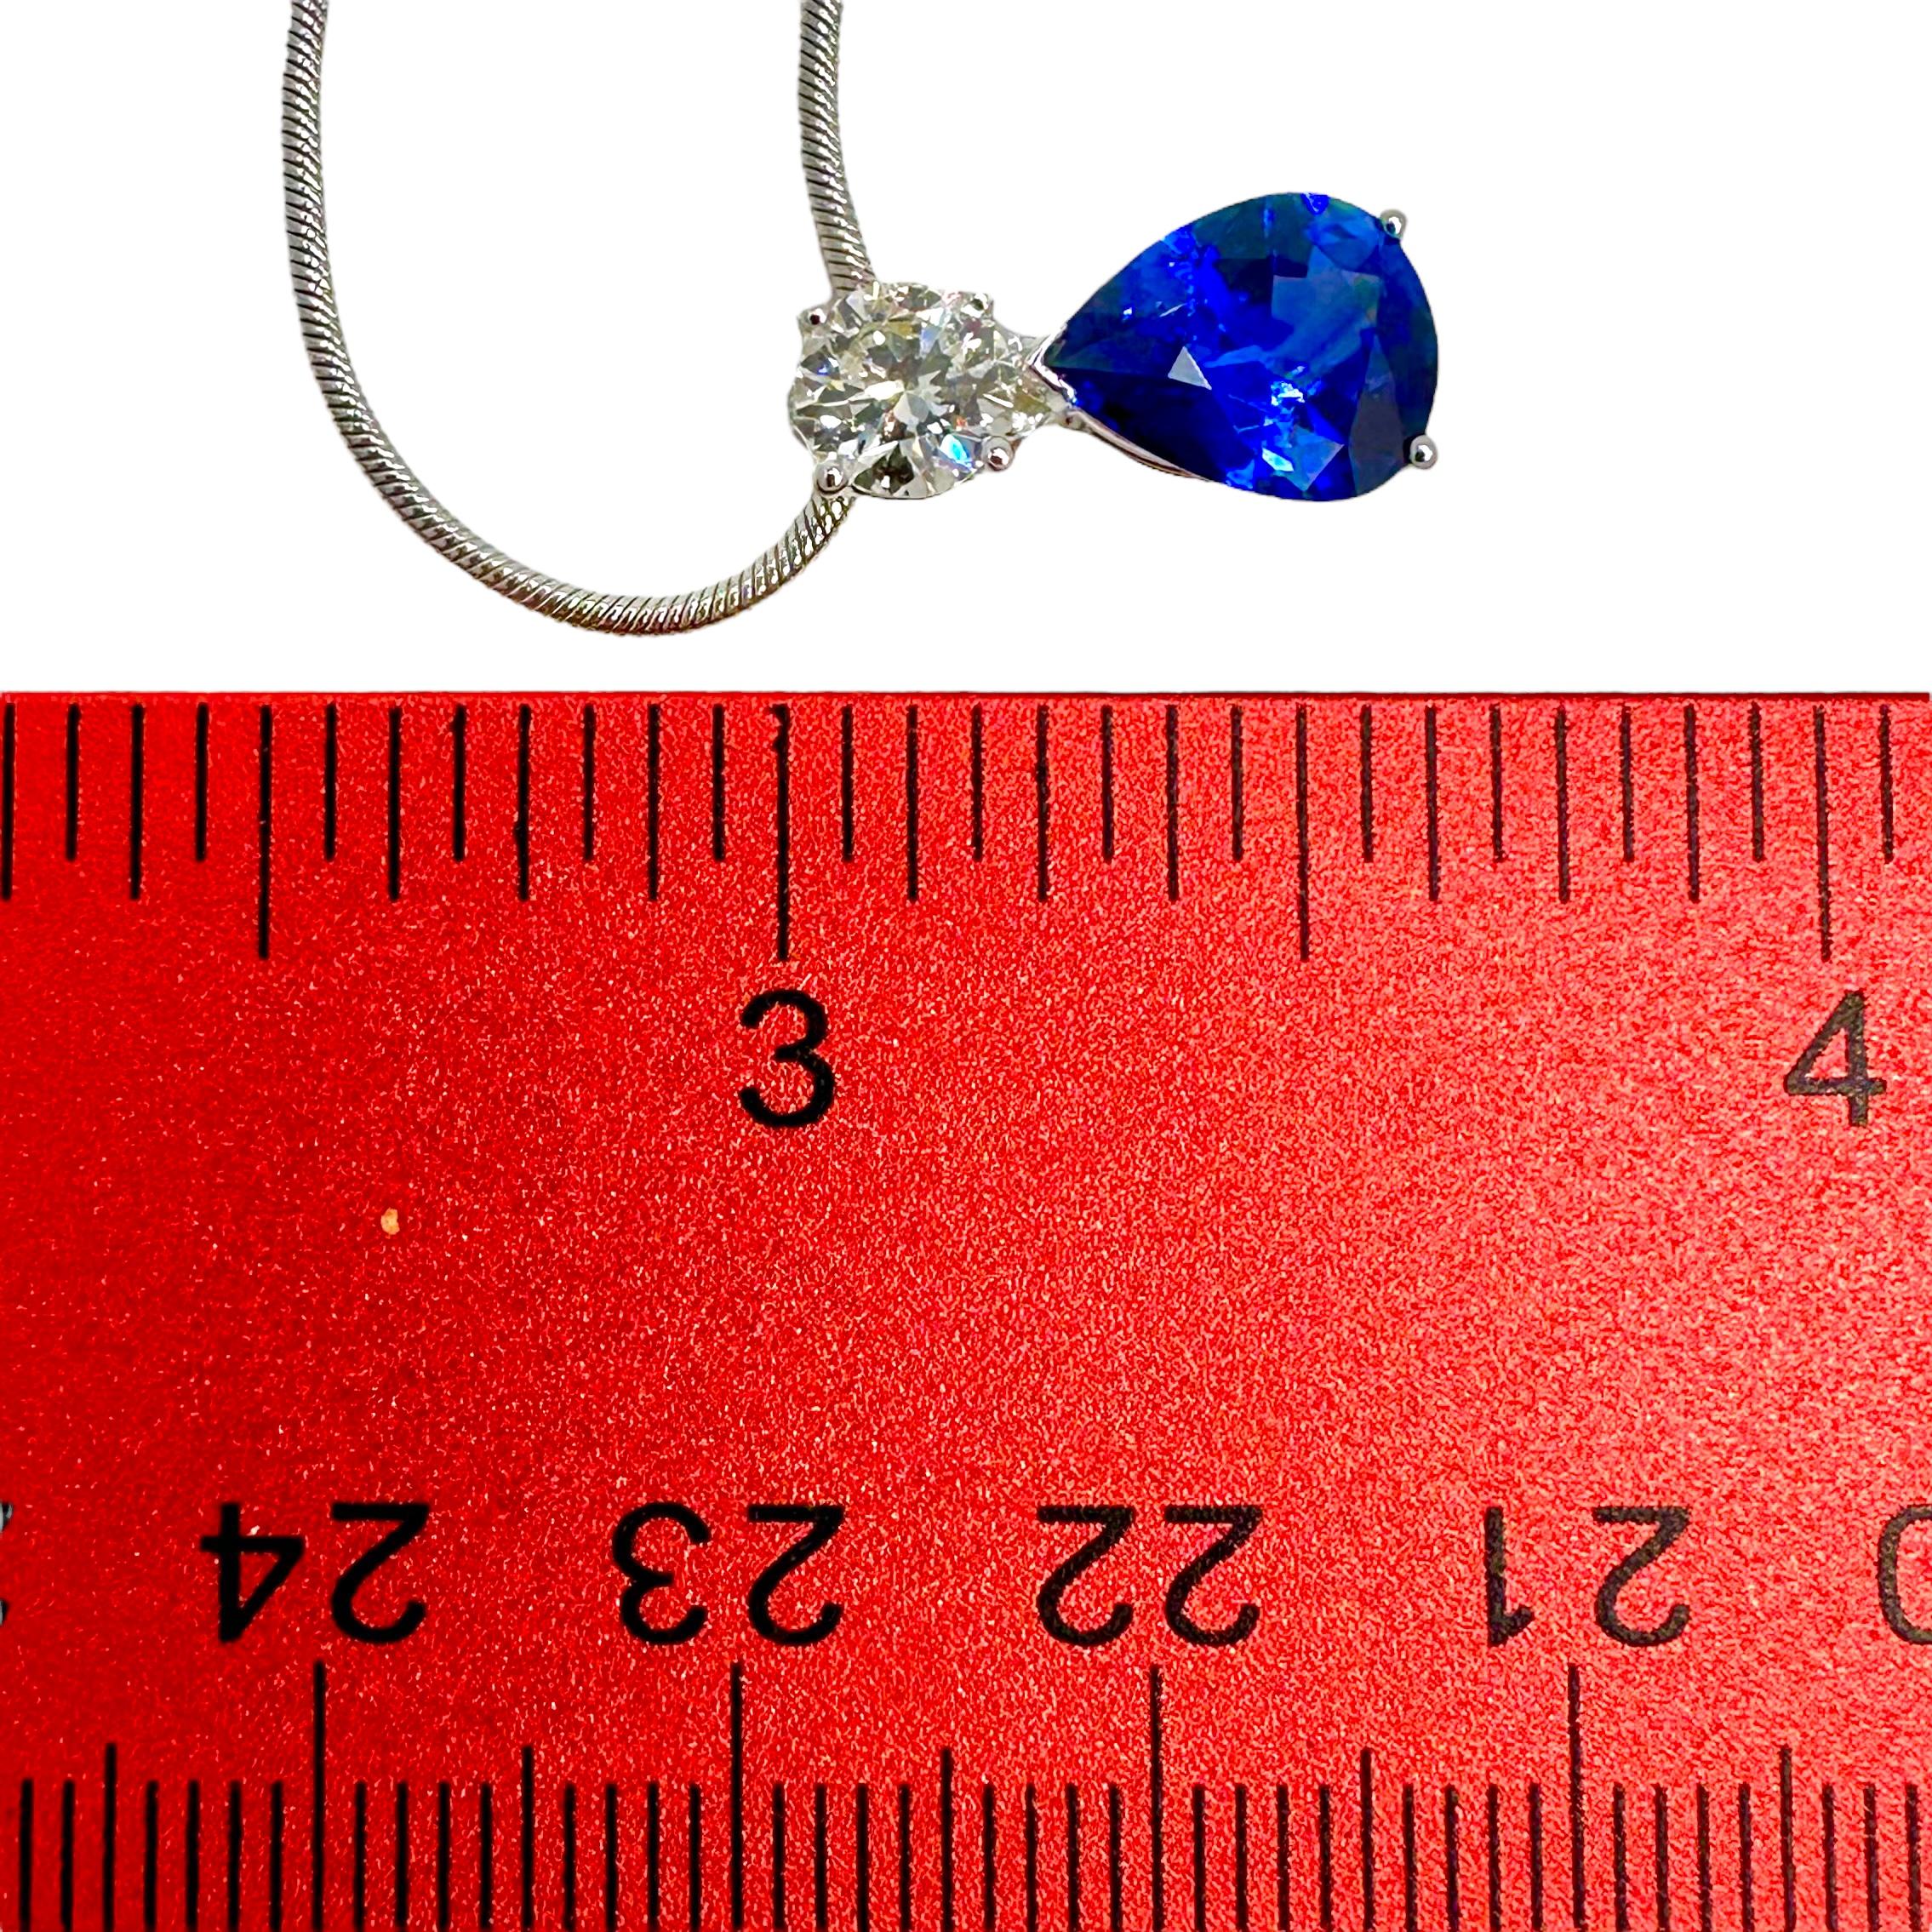 Intense Blue Pear Shape Sapphire & Diamond Pendant on 14k White Gold Snake Chain In Excellent Condition For Sale In Palm Beach, FL